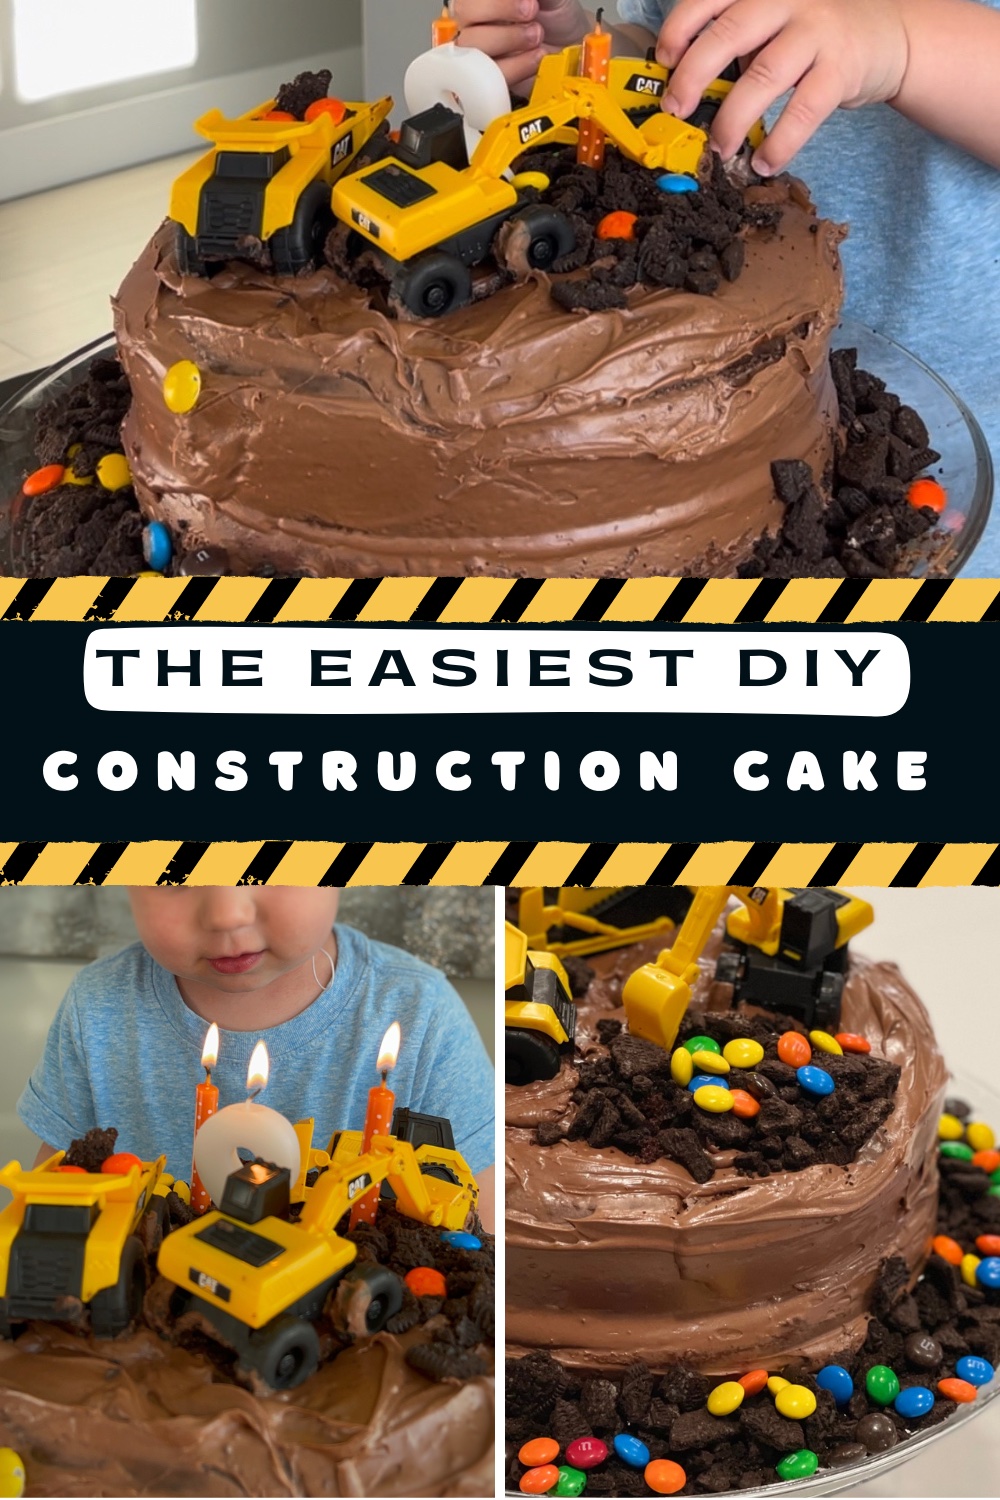 This quick and easy homemade birthday construction site cake is a hit with little boys! My 2 year absolutely loved it. It's so simple to make and impossible to mess up. It's basically just a chocolate cake sprinkled with crushed Oreos with a few toy tractors cleverly placed to make it look like a construction site. You can also add candy such as M&Ms for added color and fun.